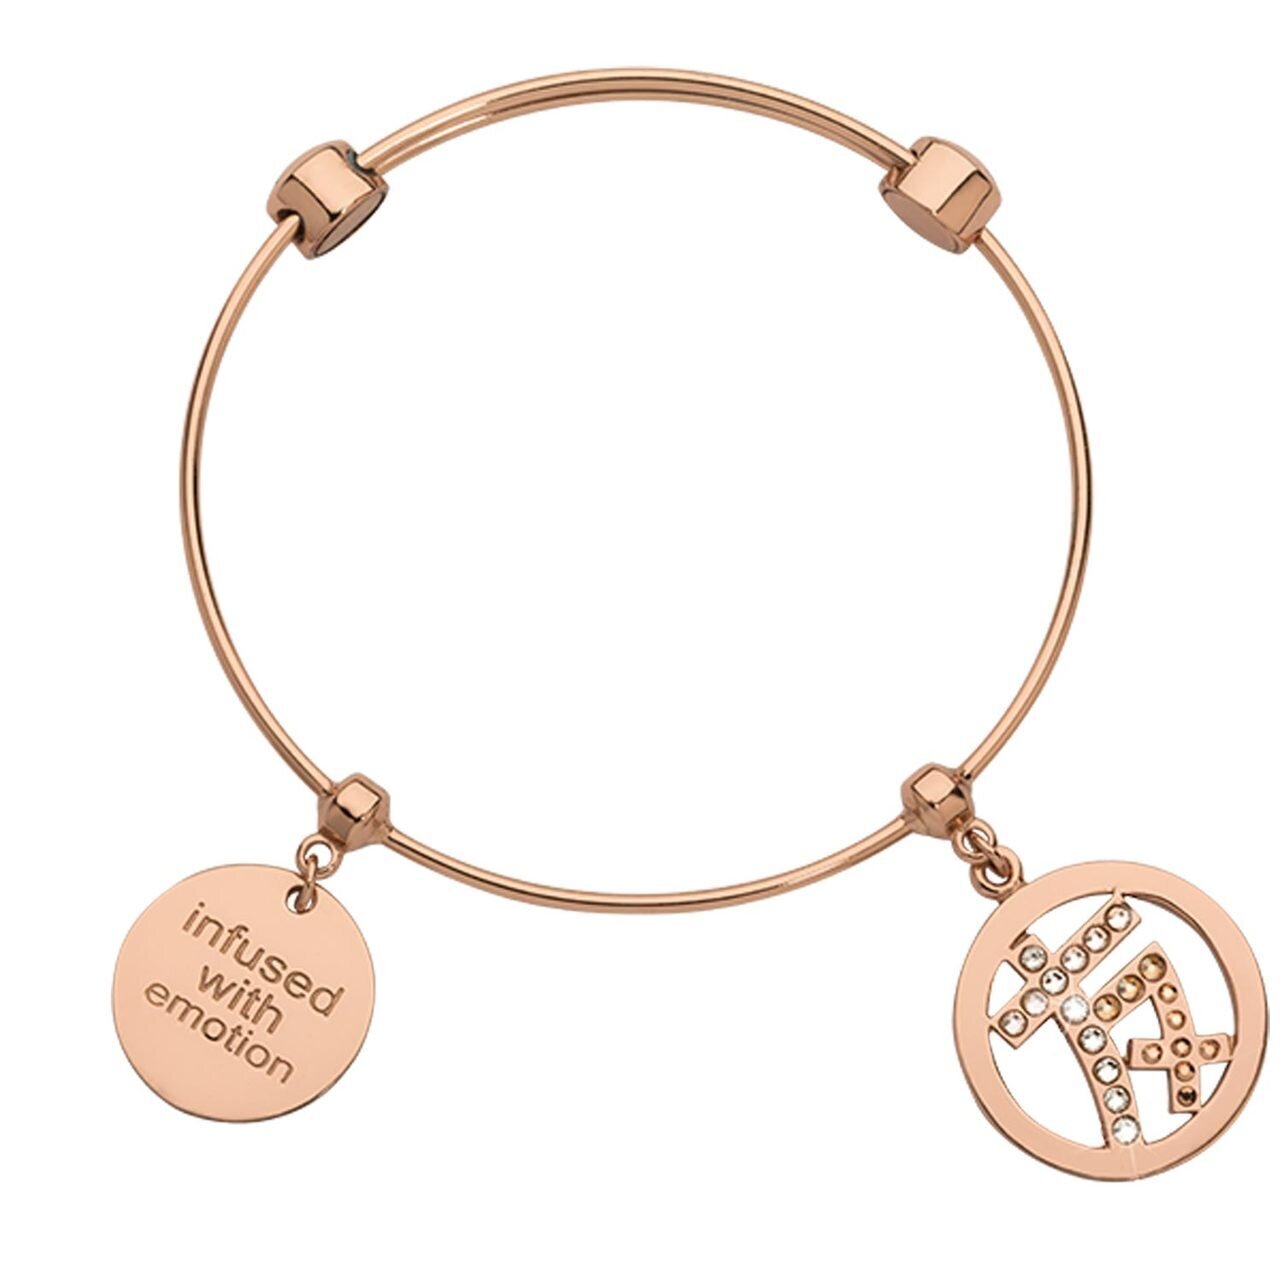 Nikki Lissoni Charm Bangle with Two Fixed Charms Infused with Emotion By Chinese Sign For Friendship Rose Gold-plated 17cm B1151RG17